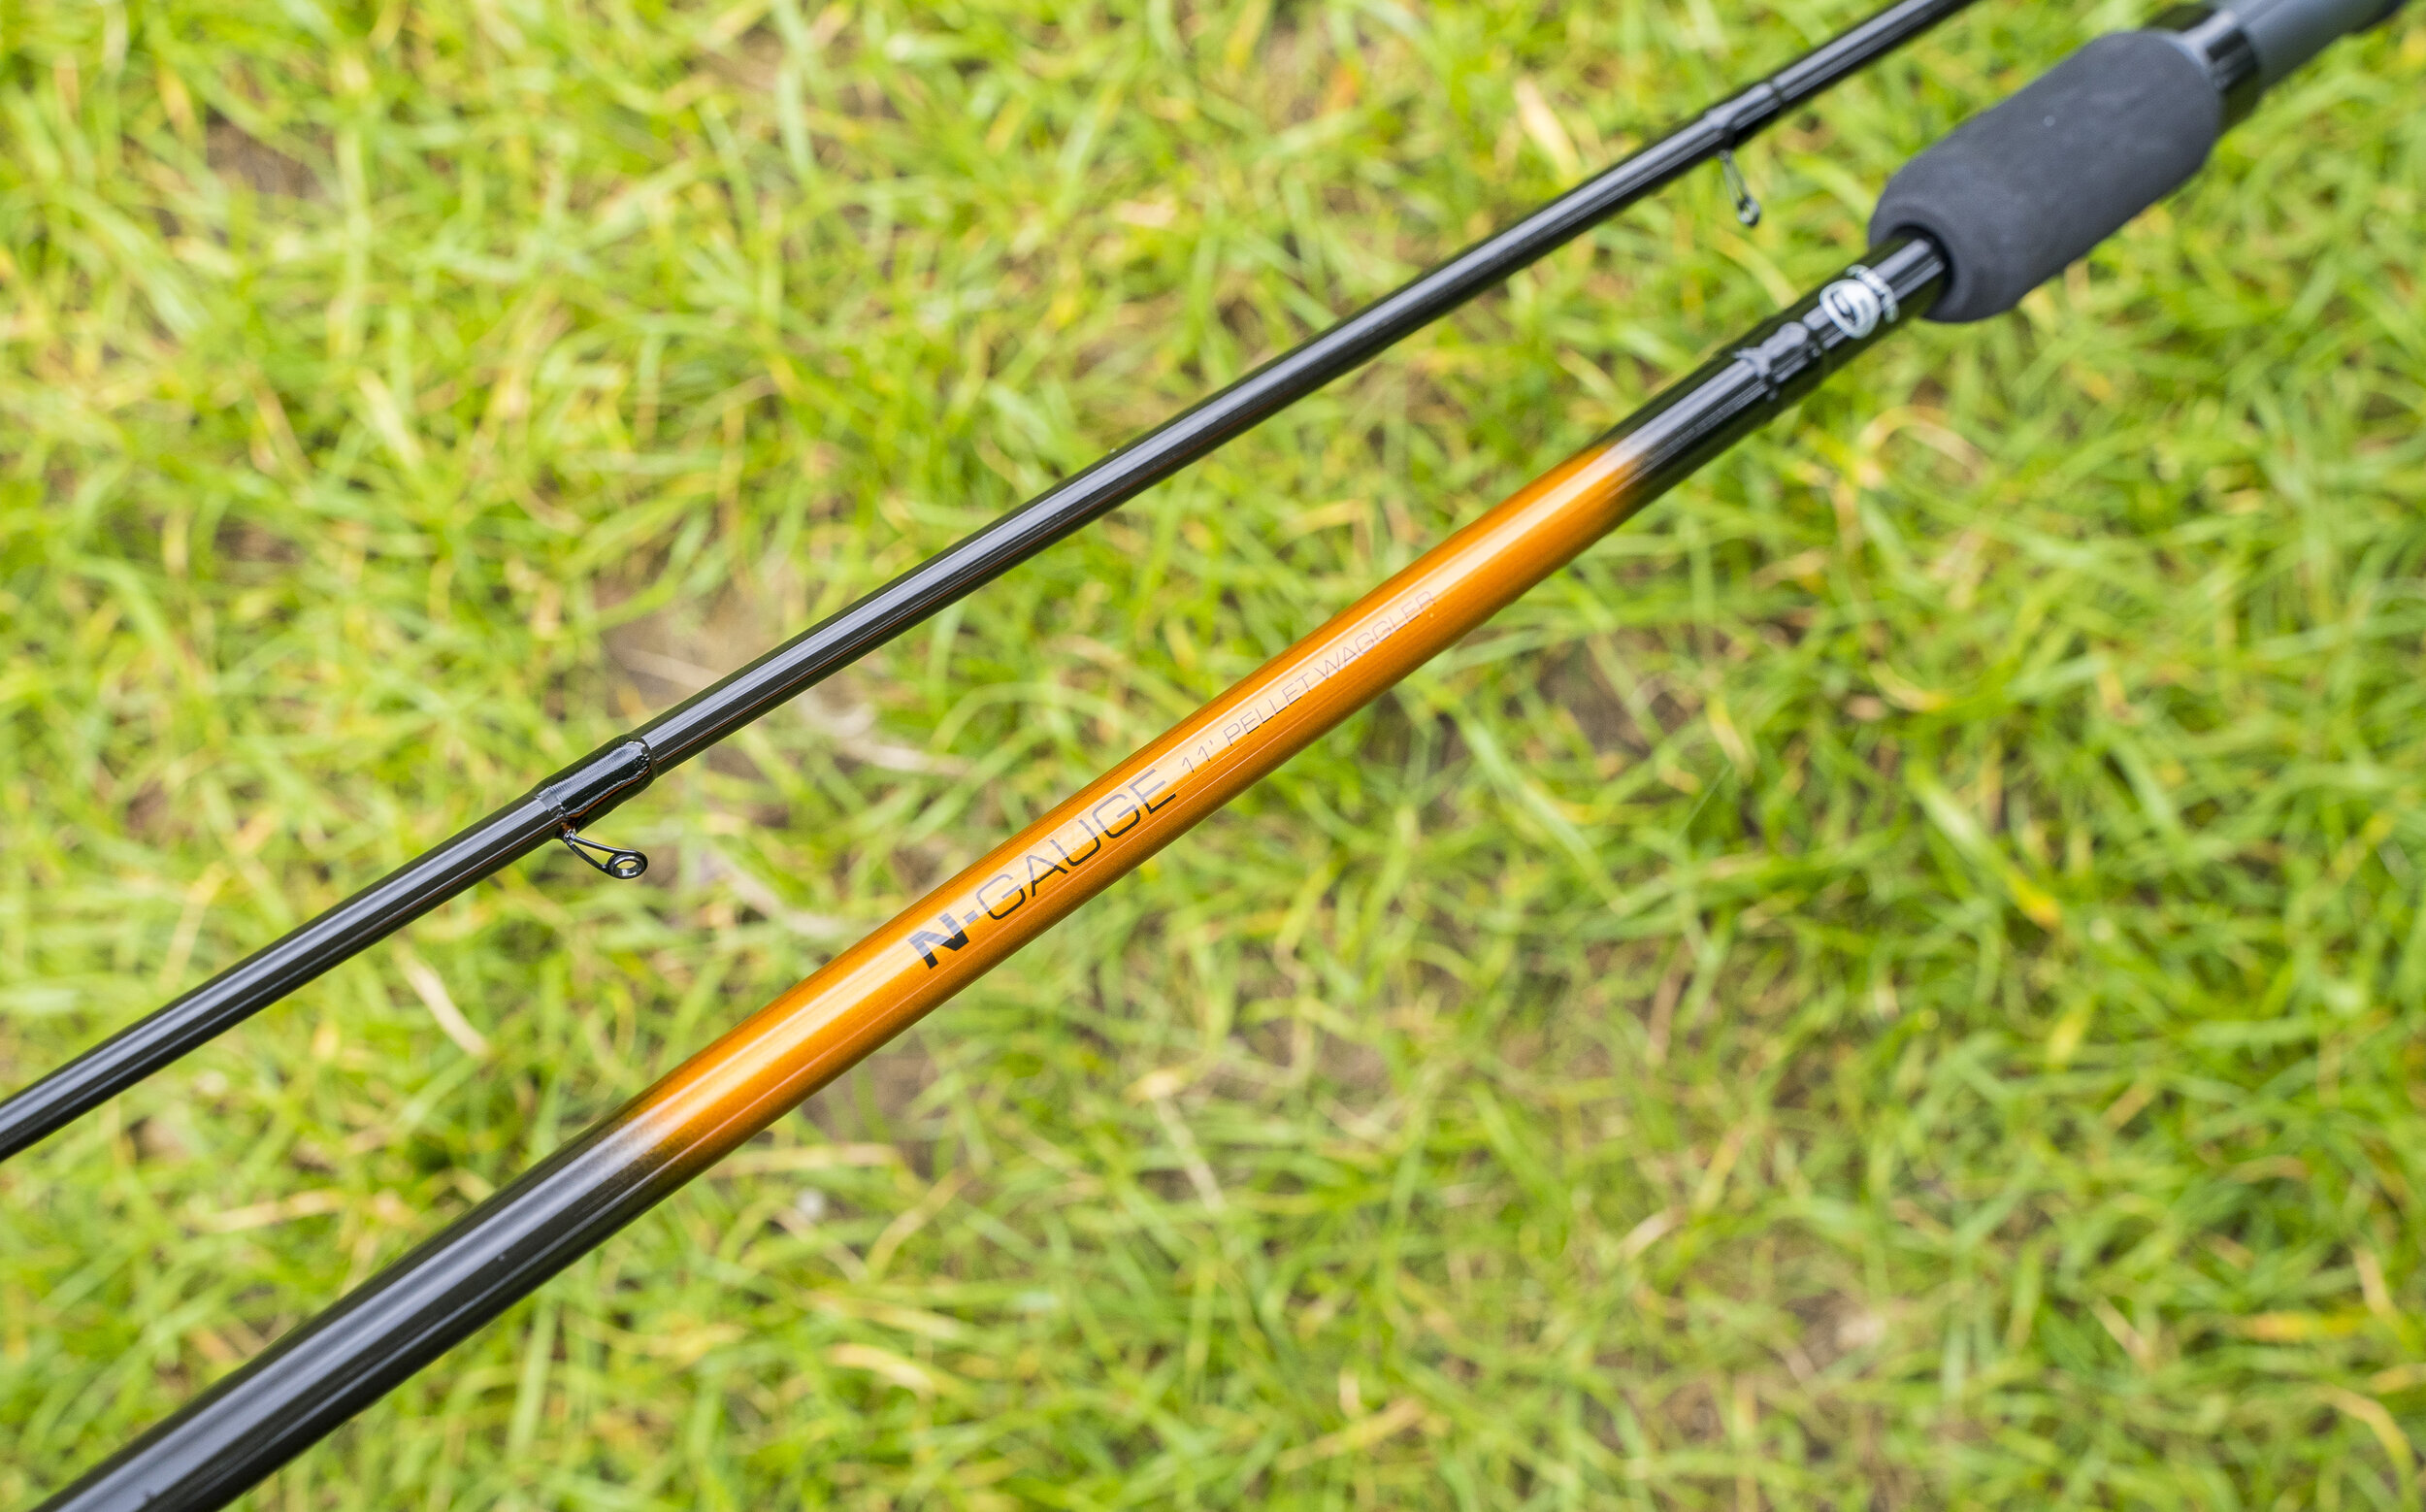 GREAT RODS LOW PRICES! MIDDY 4GS SUPPLEX FEEDER AND WAGGLER RODS 